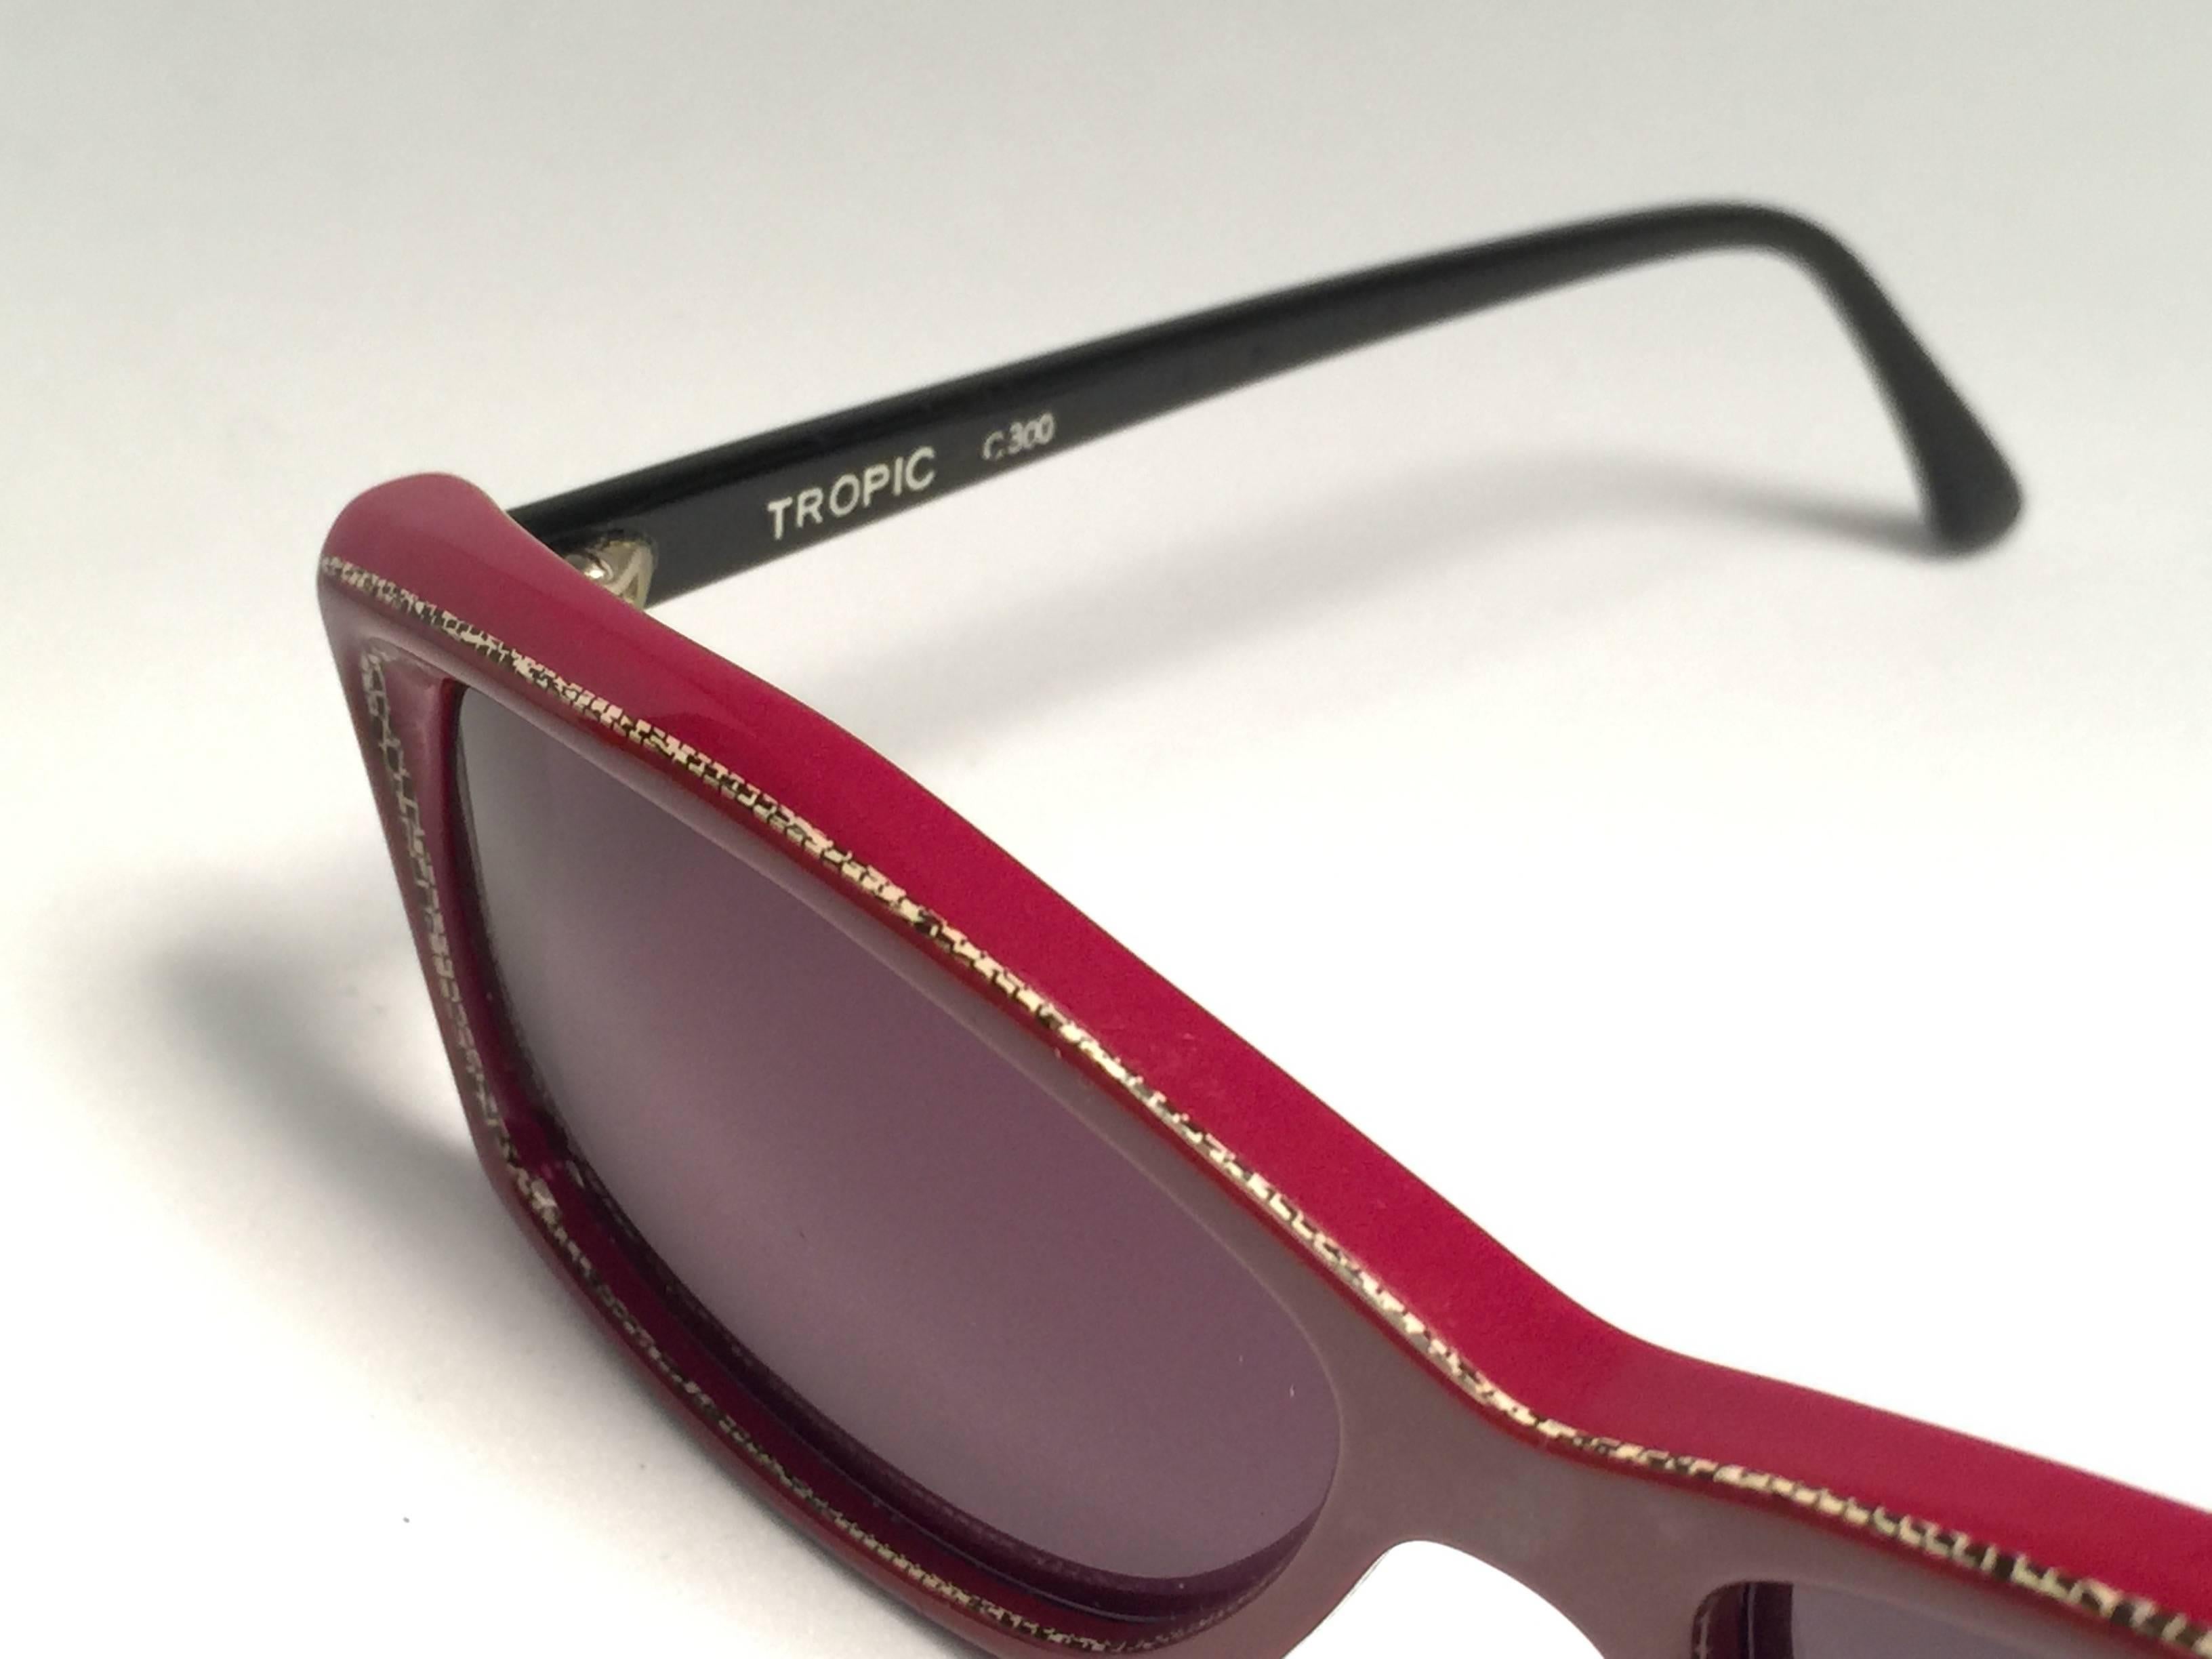 New Vintage Rare Pierre Marly Tropic Burgundy Avantgarde 1960 Sunglasses In Excellent Condition For Sale In Baleares, Baleares